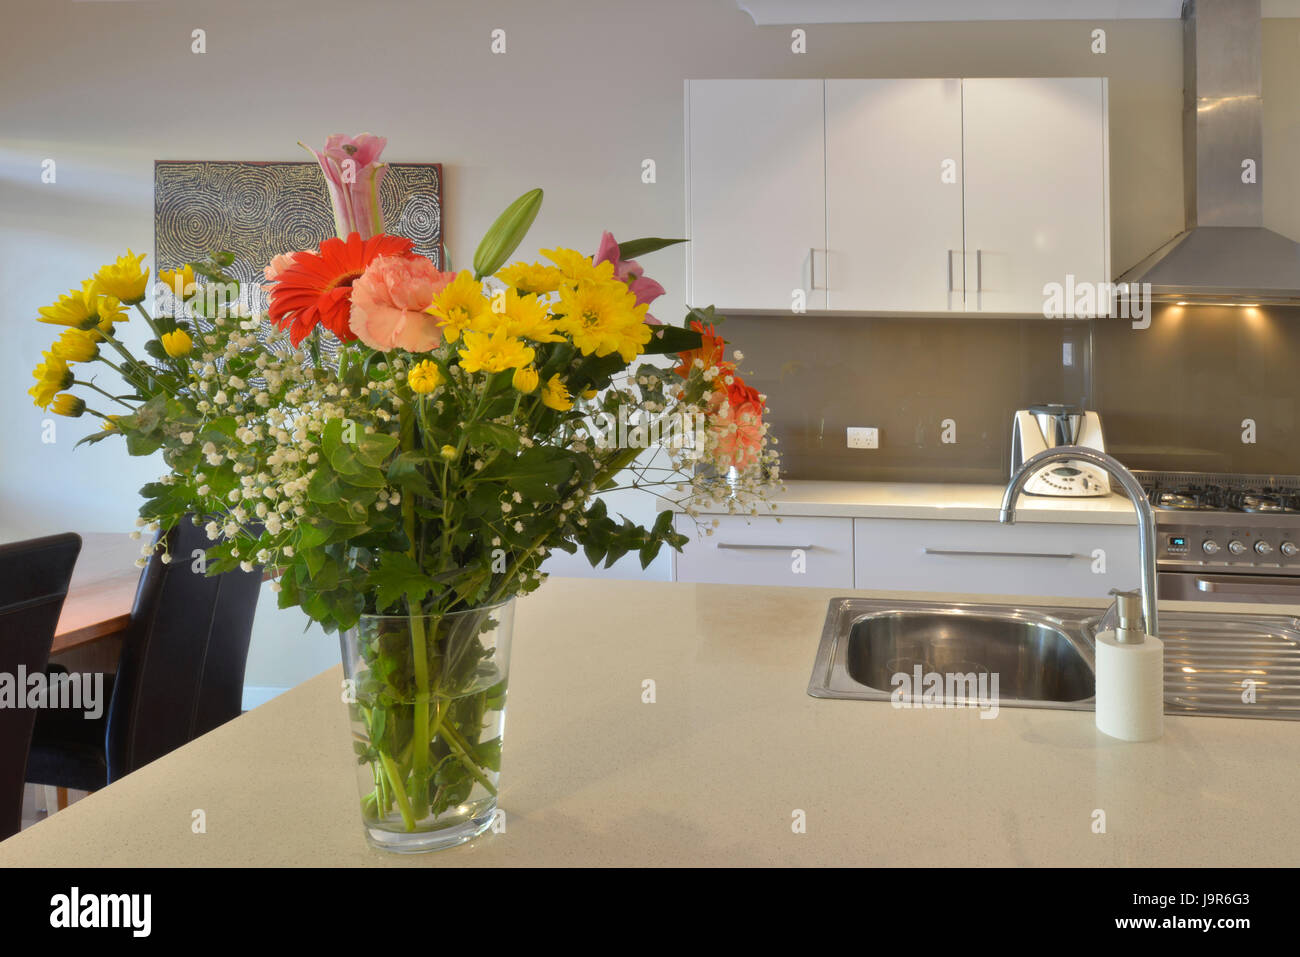 Modern Australian kitchen, with clean surfaces and vase of flowers. Stock Photo